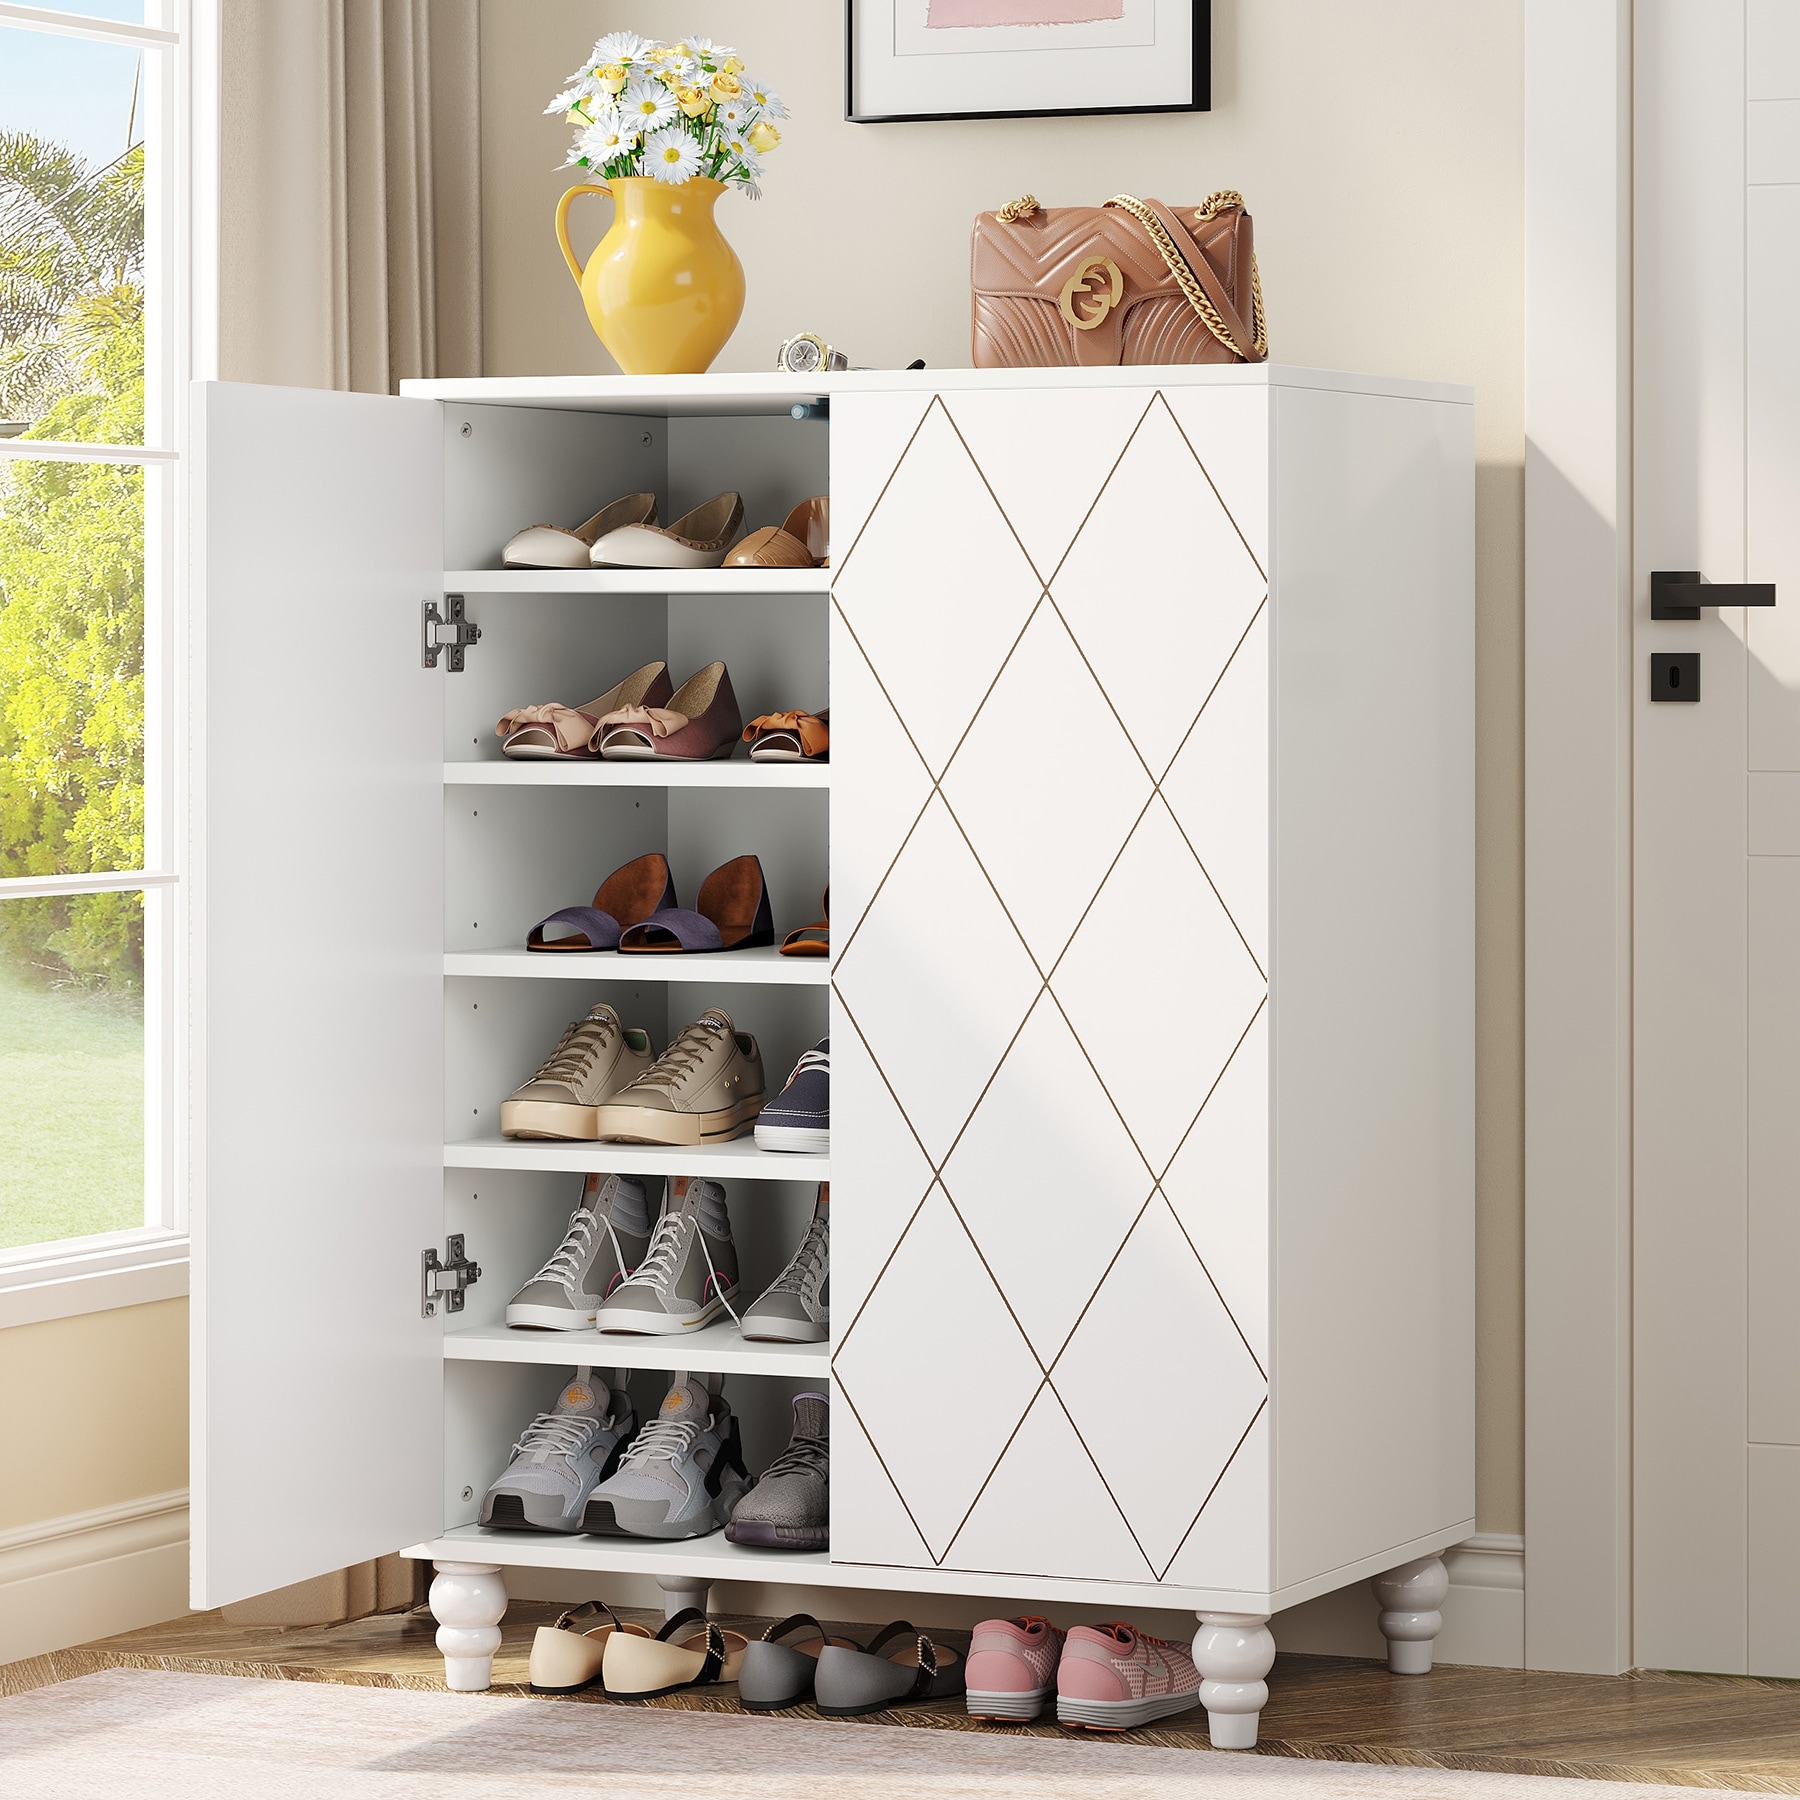 https://ak1.ostkcdn.com/images/products/is/images/direct/36b99622a7c2ad8b0d455389ef2428e675e6a79b/Maple--White-Shoe-Cabinet-with-Doors%2C-2-door-Shoes-Storage-Cabinets-with-Solid-Wood-Legs.jpg